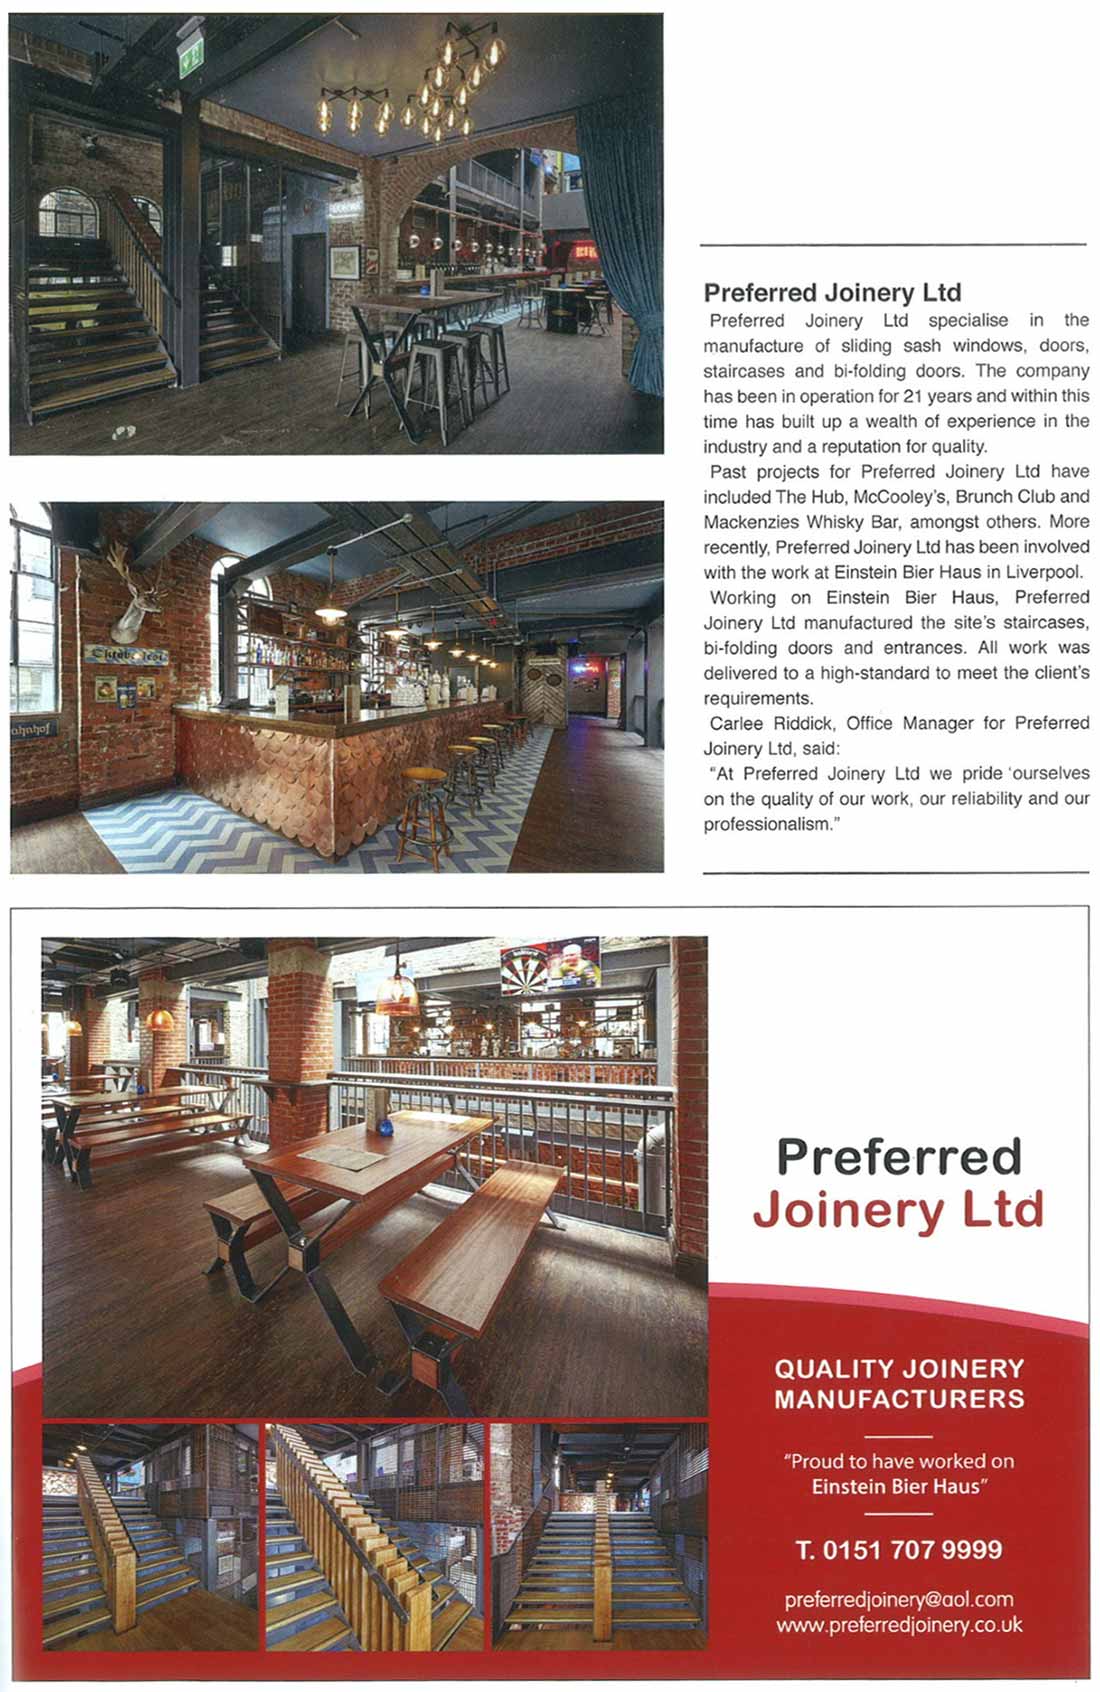 News article about Preferred Joinery LTD